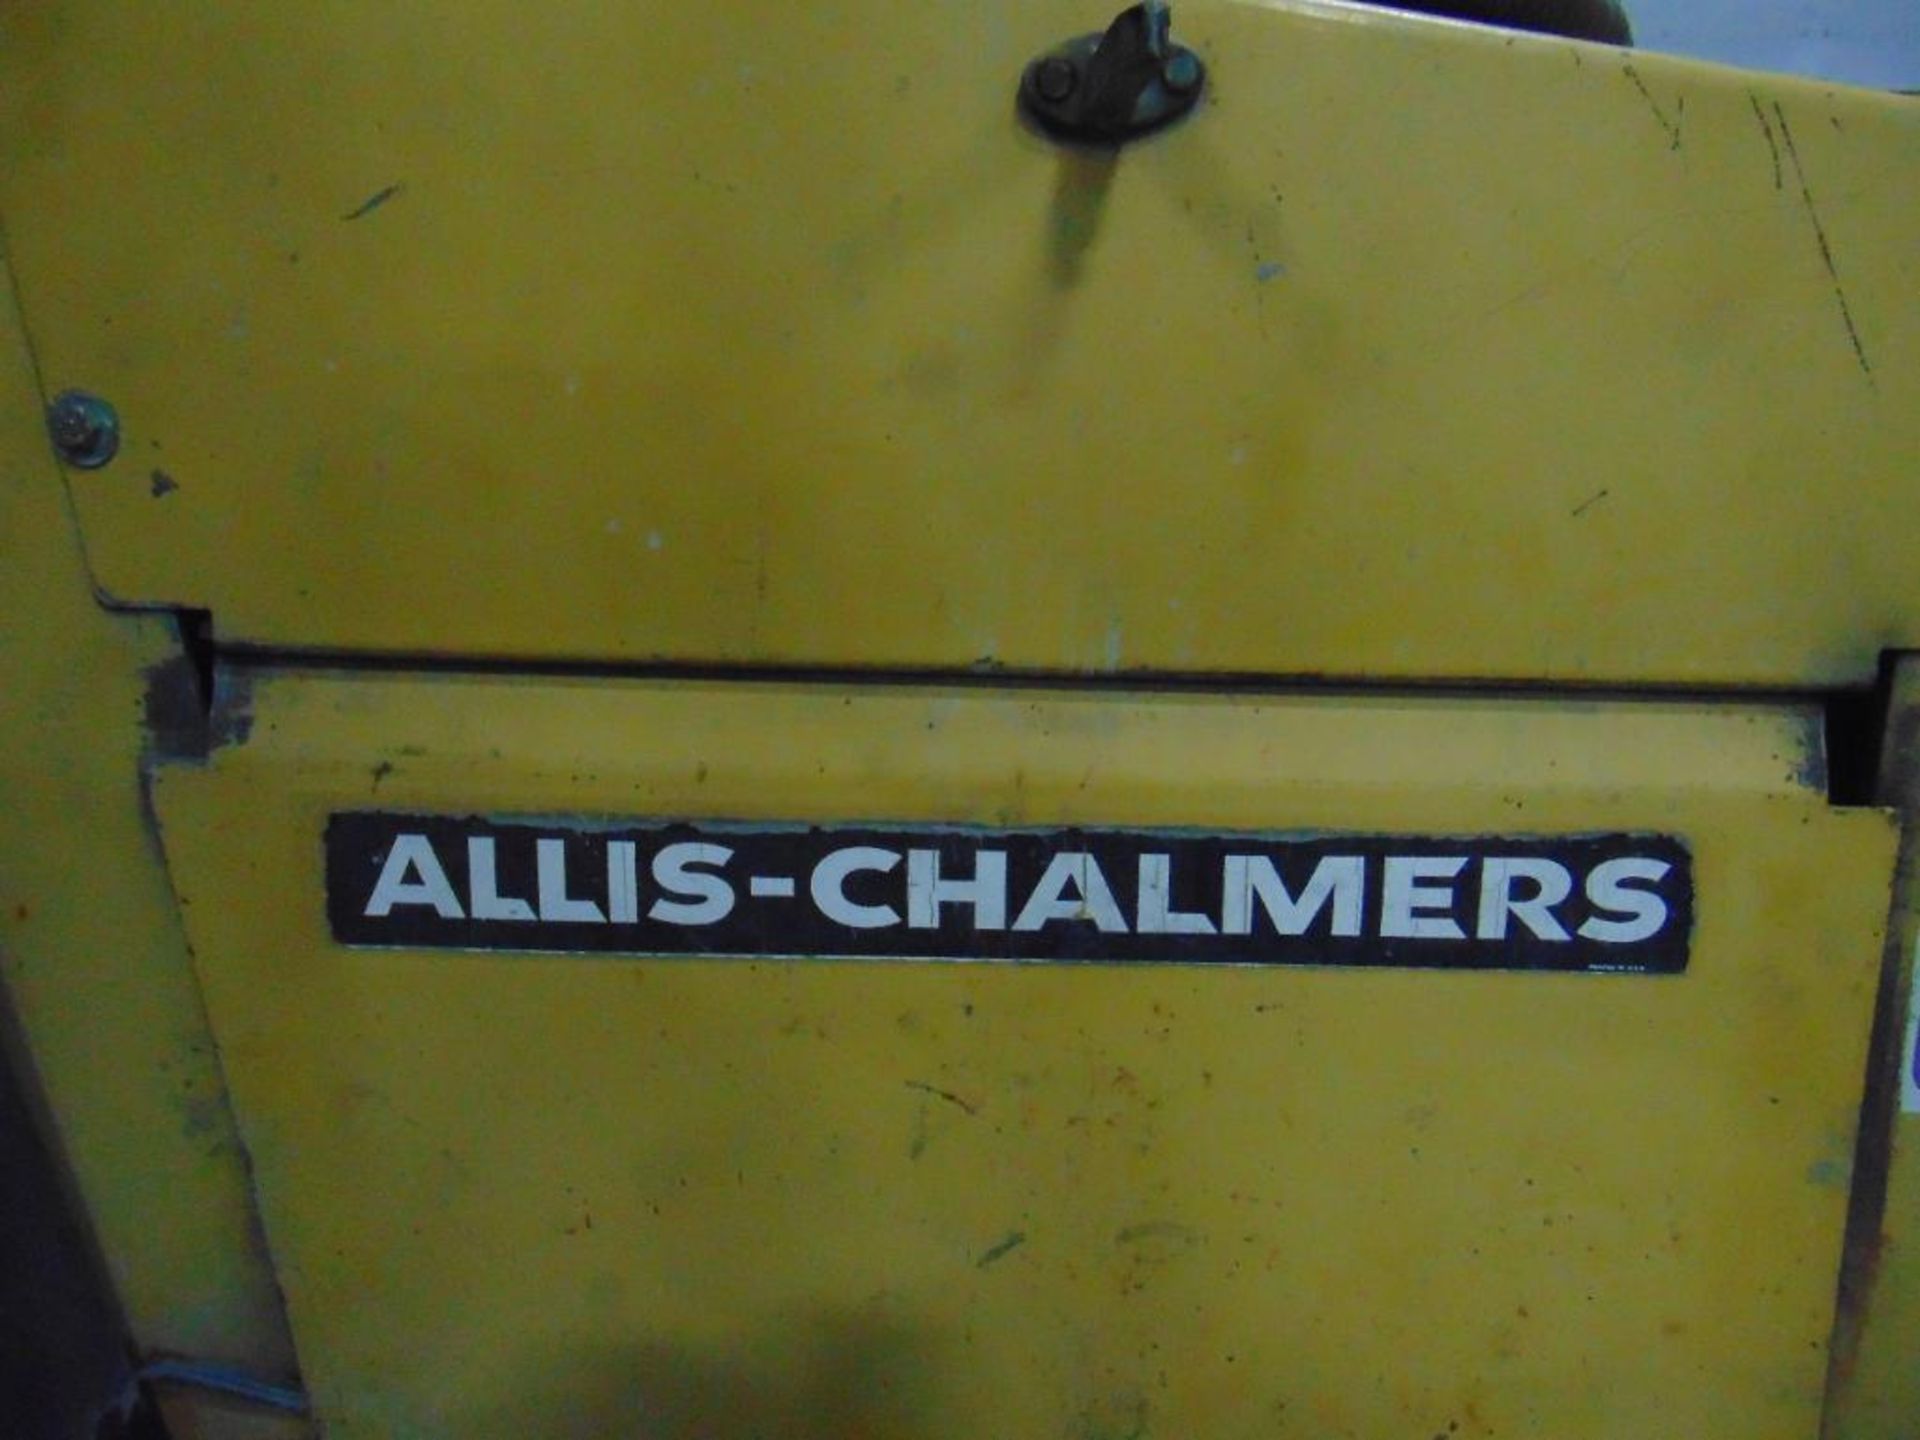 Allis Chalmers 706D All-Terrain Forklift - Image 10 of 17